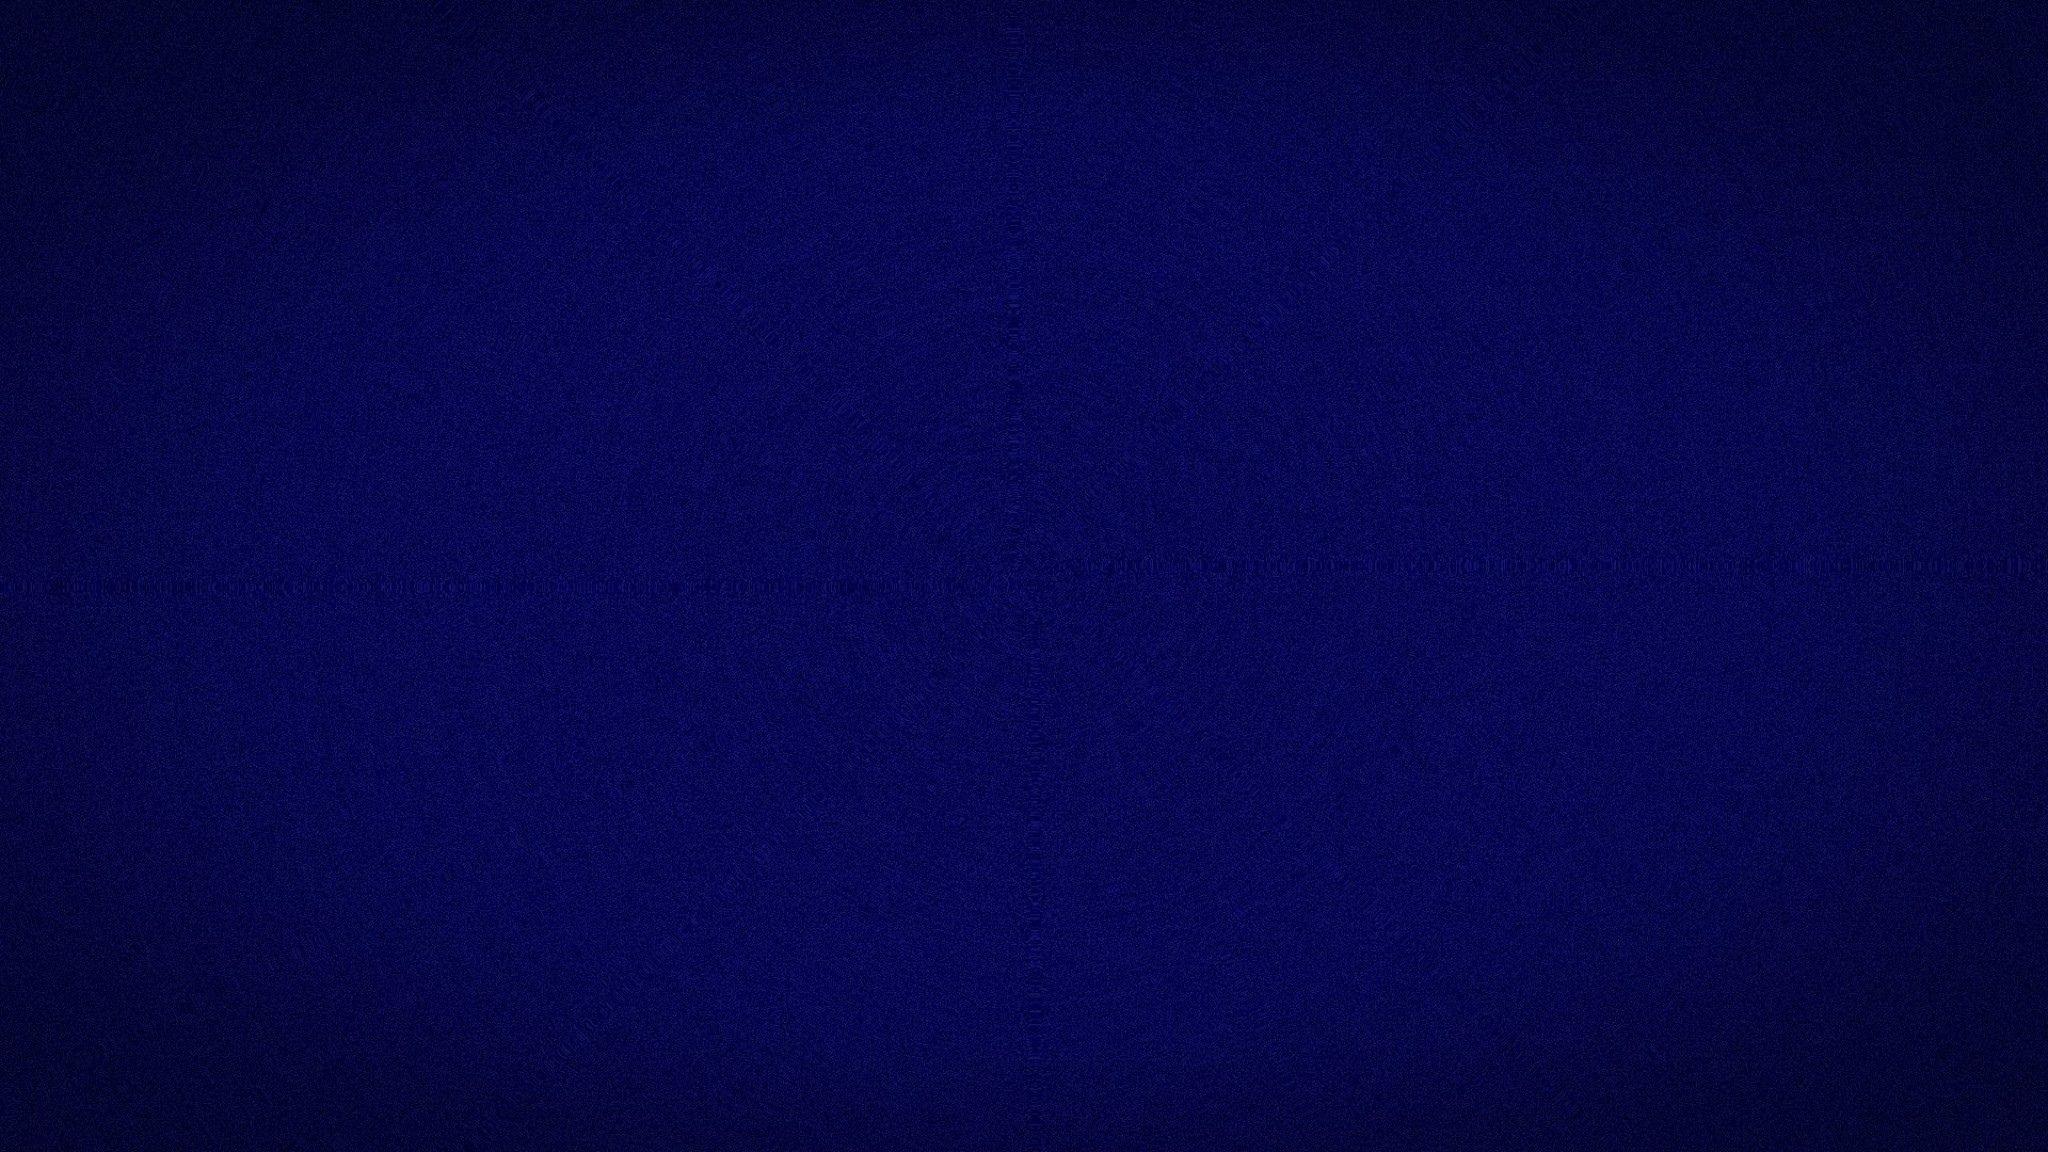 Dark Blue And Purple Wallpapers - Top Free Dark Blue And Purple